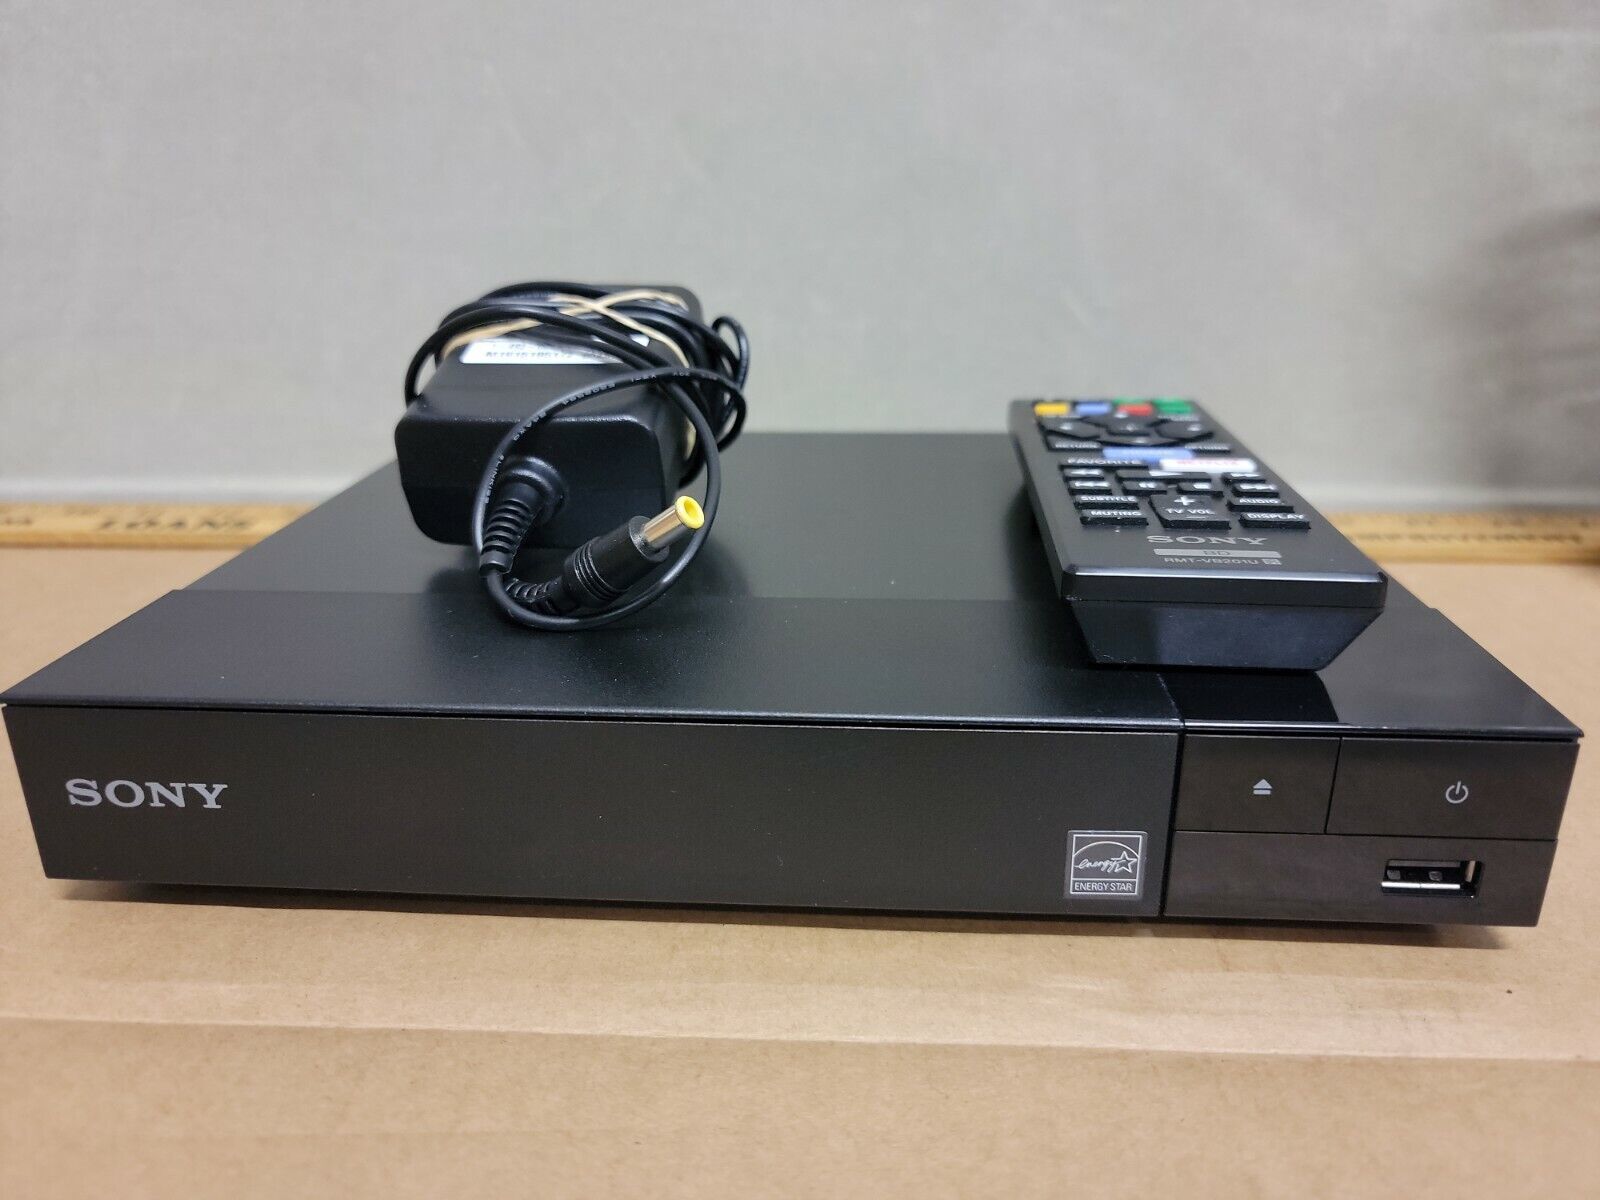 Sony BDP-S1700 Blu-ray Player Plays Blu-ray or DVD Used - $74.95